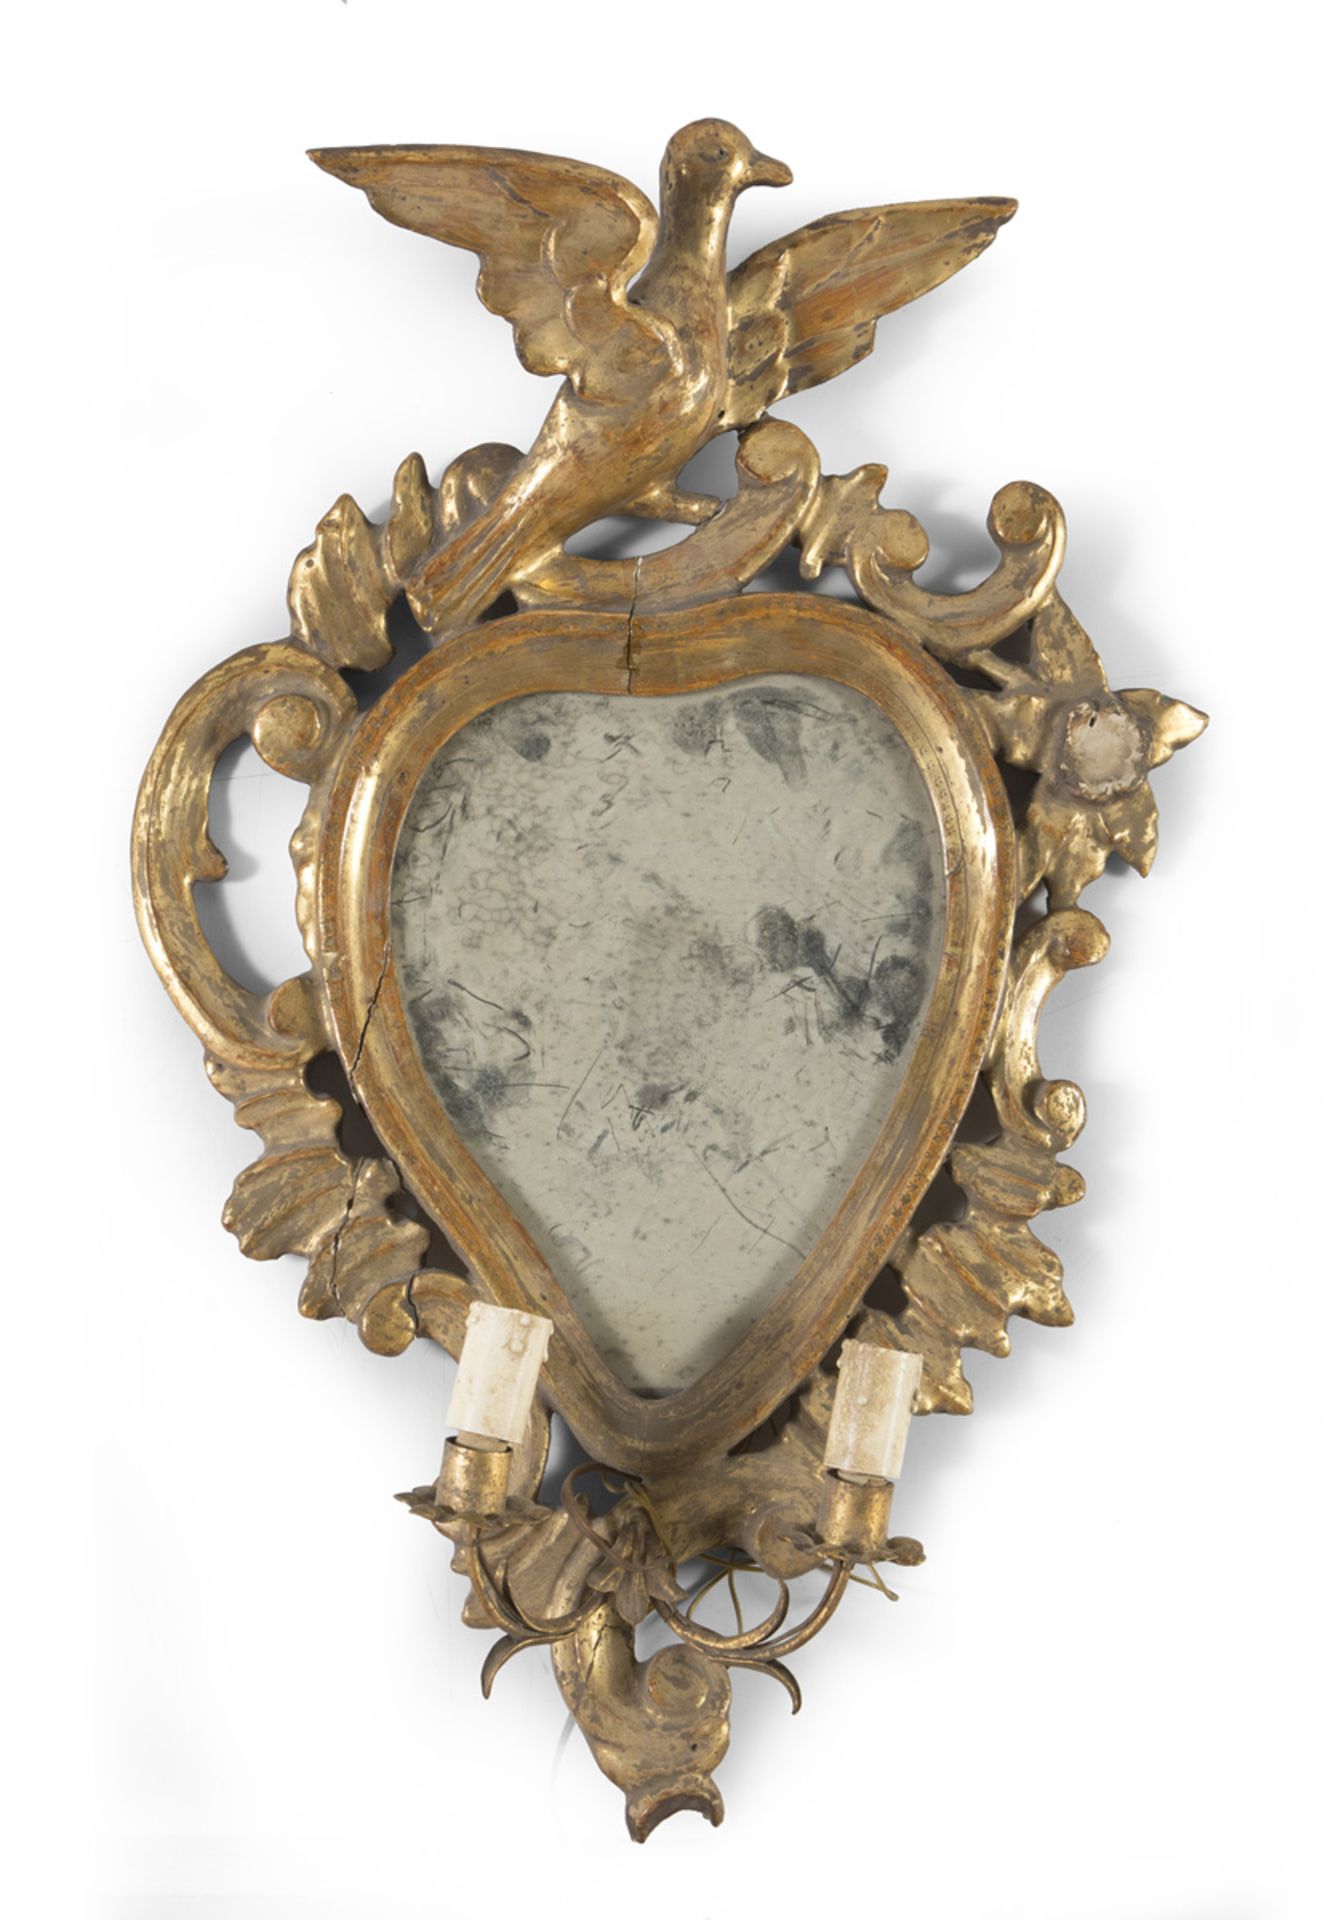 PAIR OF SMALL MIRRORS IN GILTWOOD CENTRAL ITALY END OF THE 18TH CENTURY